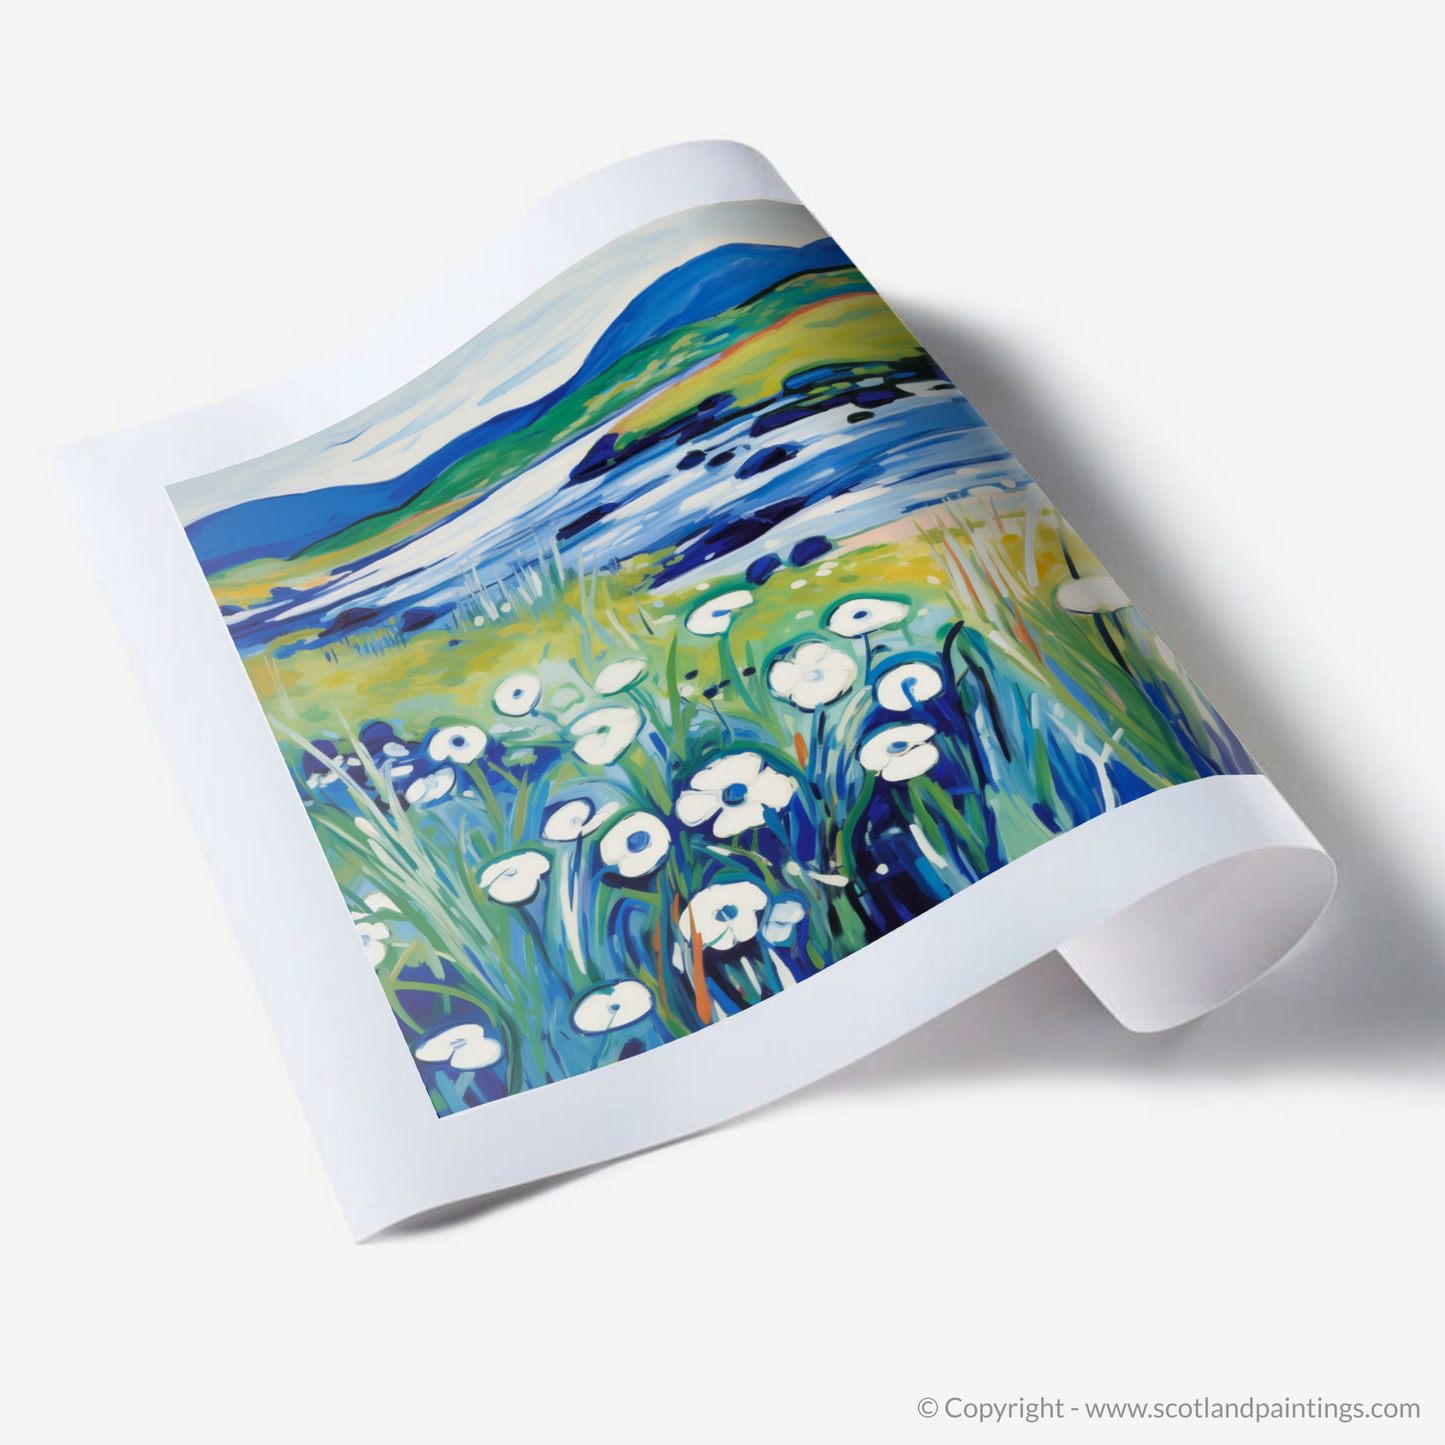 Wild Cotton Grass Fauvism: A Tribute to the Isle of Skye's Upland Bogs